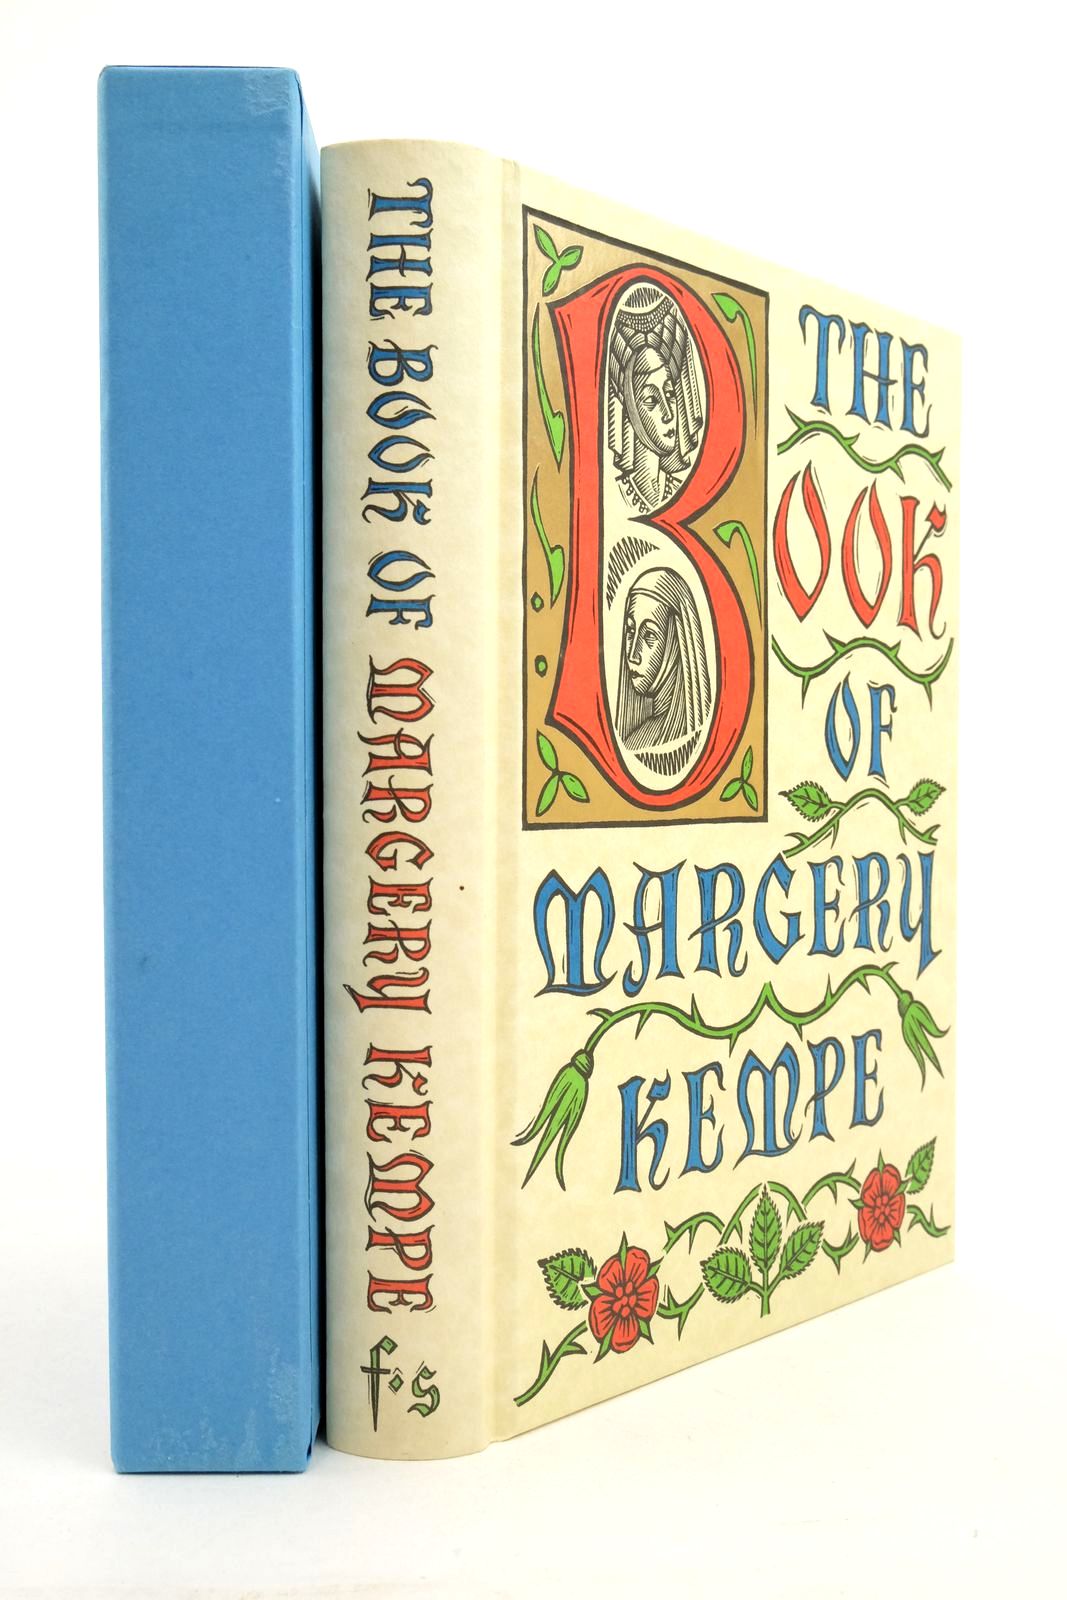 Photo of THE BOOK OF MARGERY KEMPE- Stock Number: 2138147